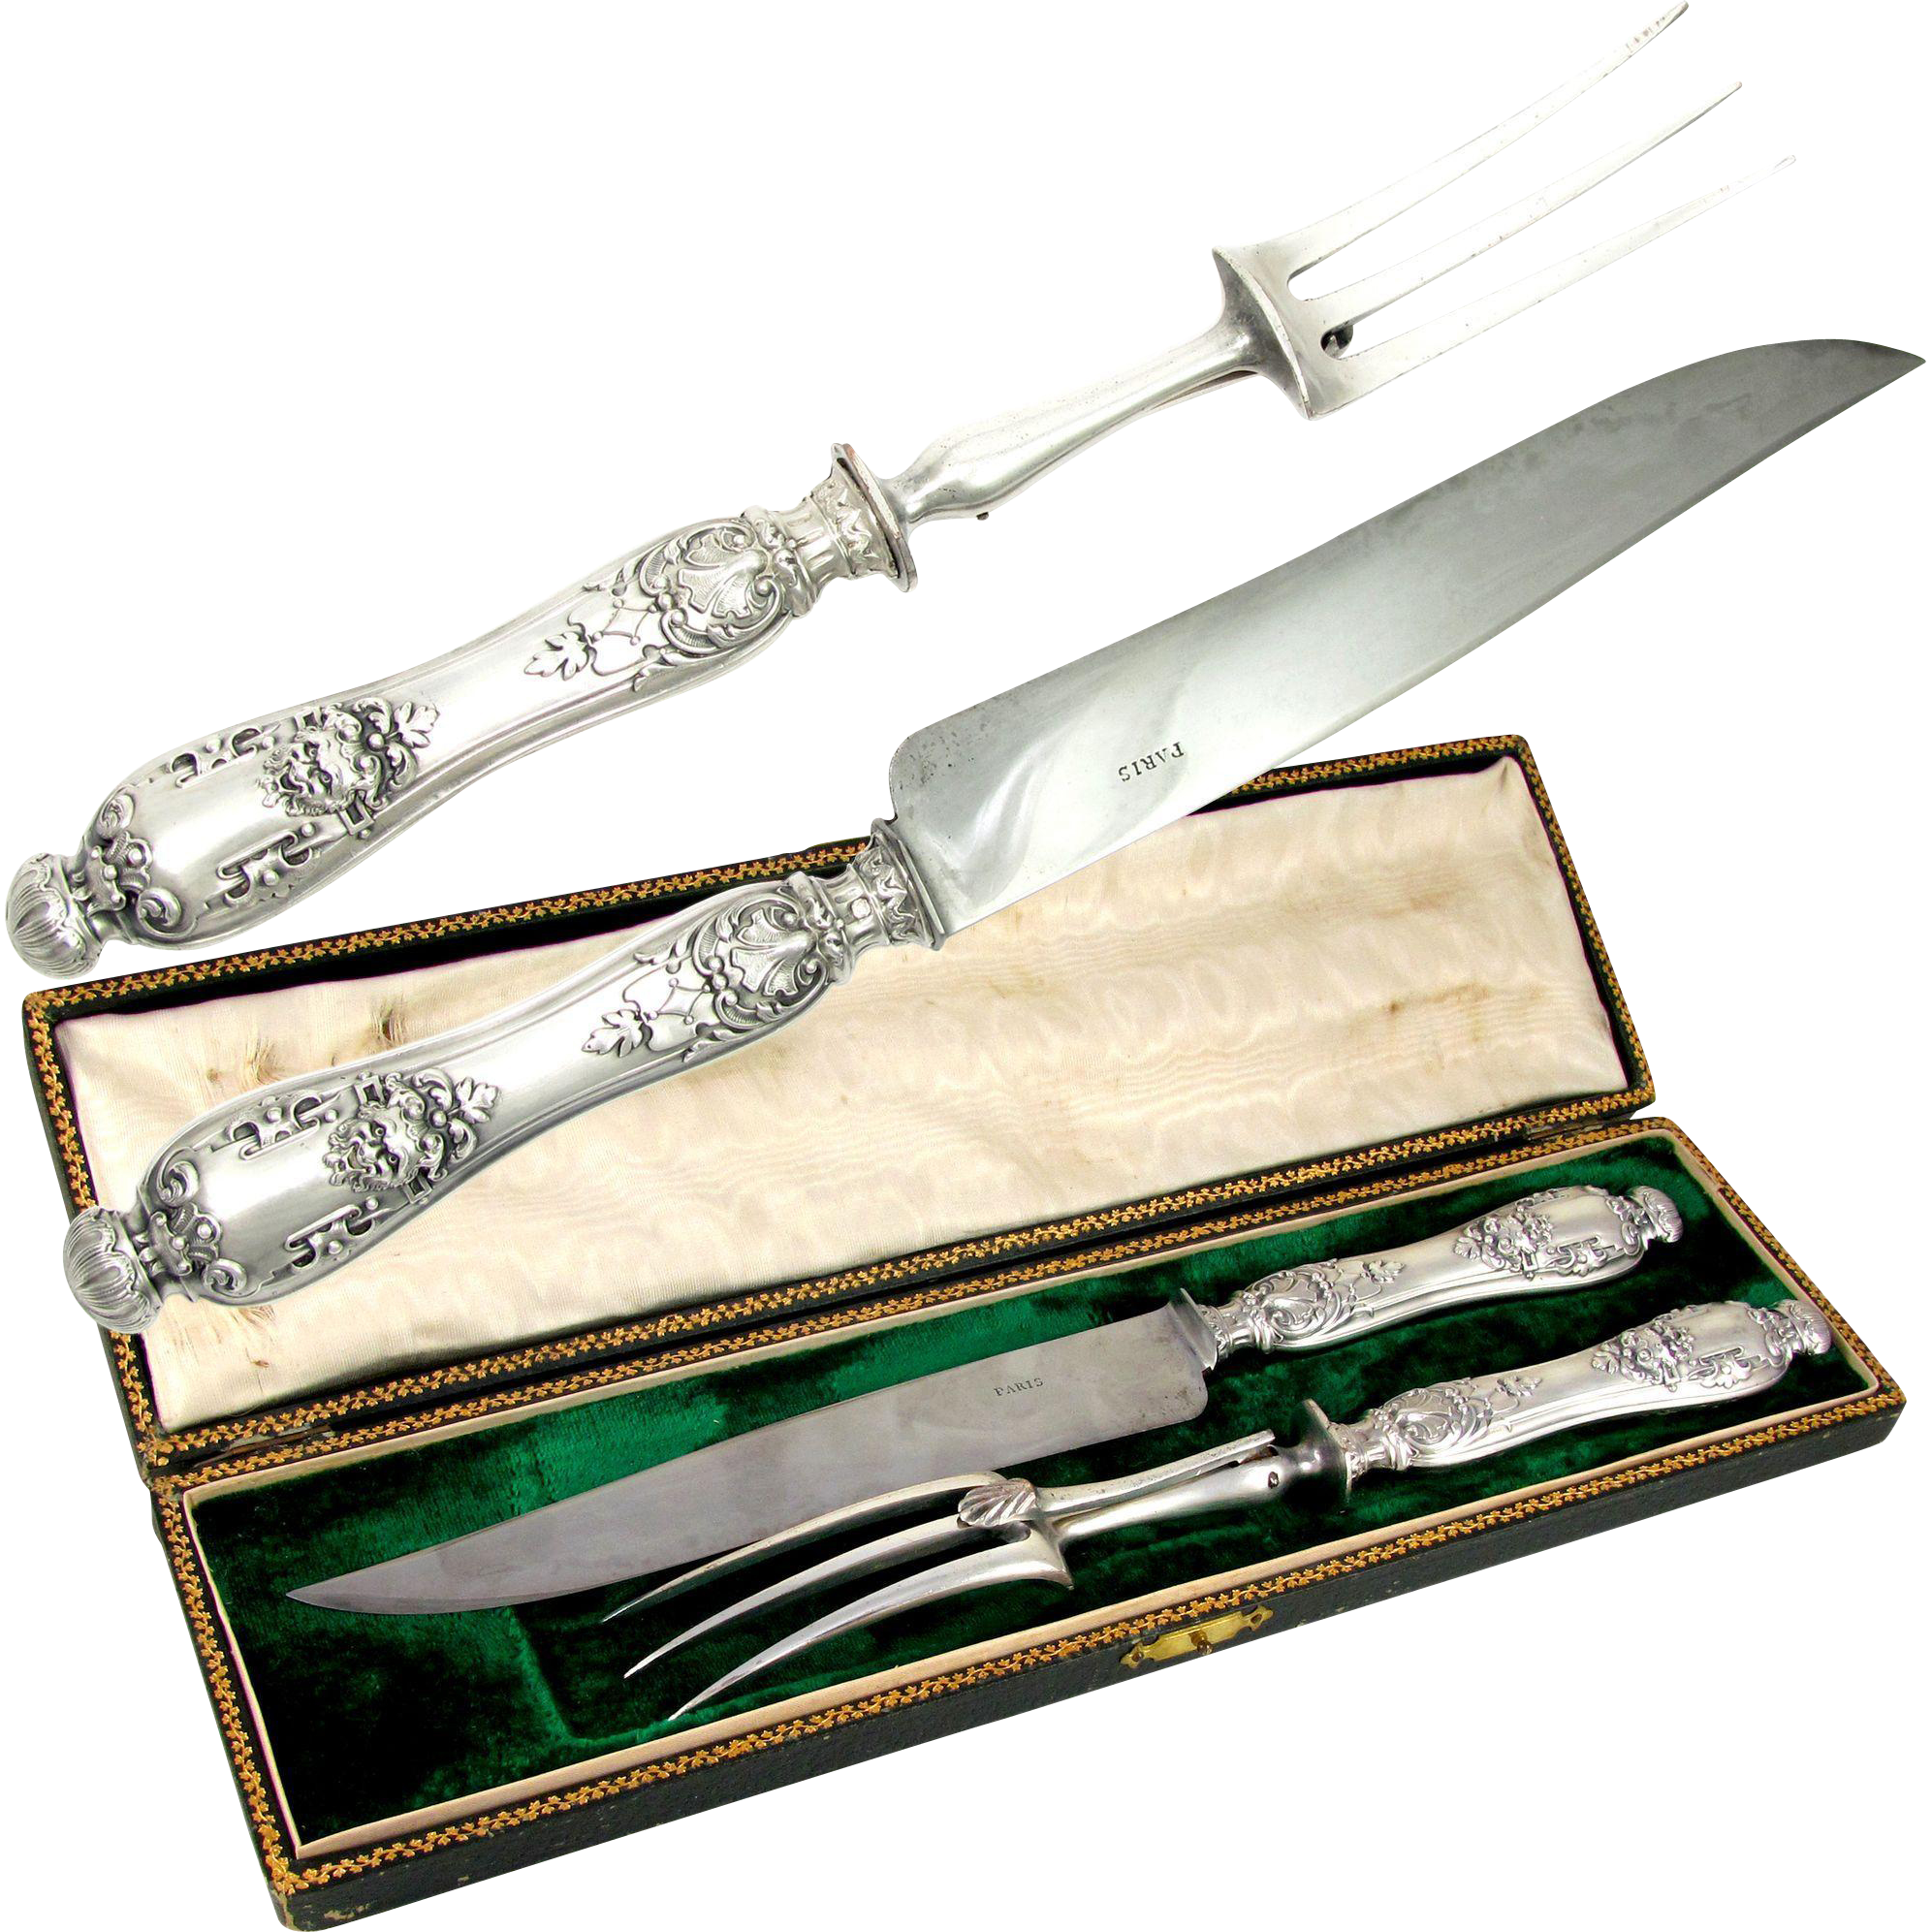 Meat carving knife and fork set